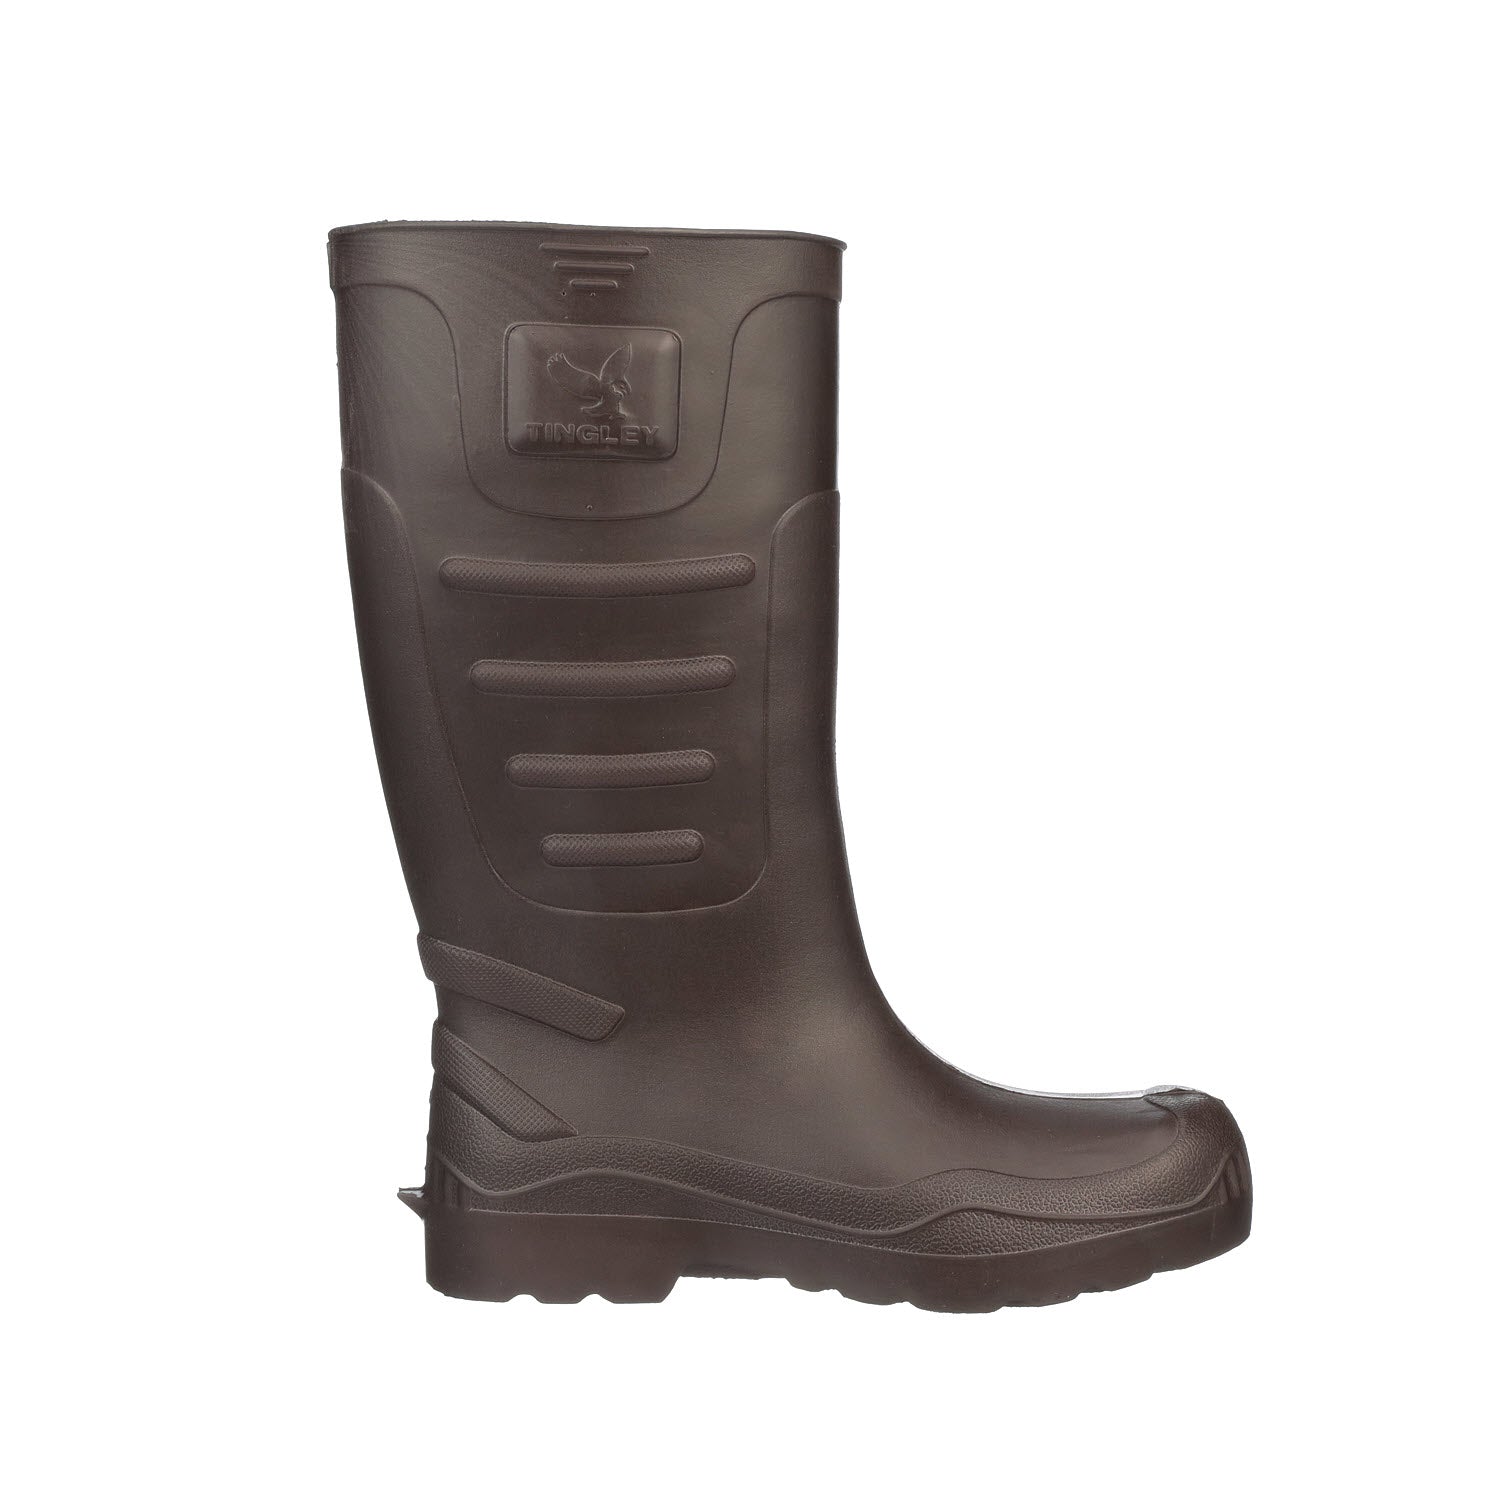 utility rubber boots